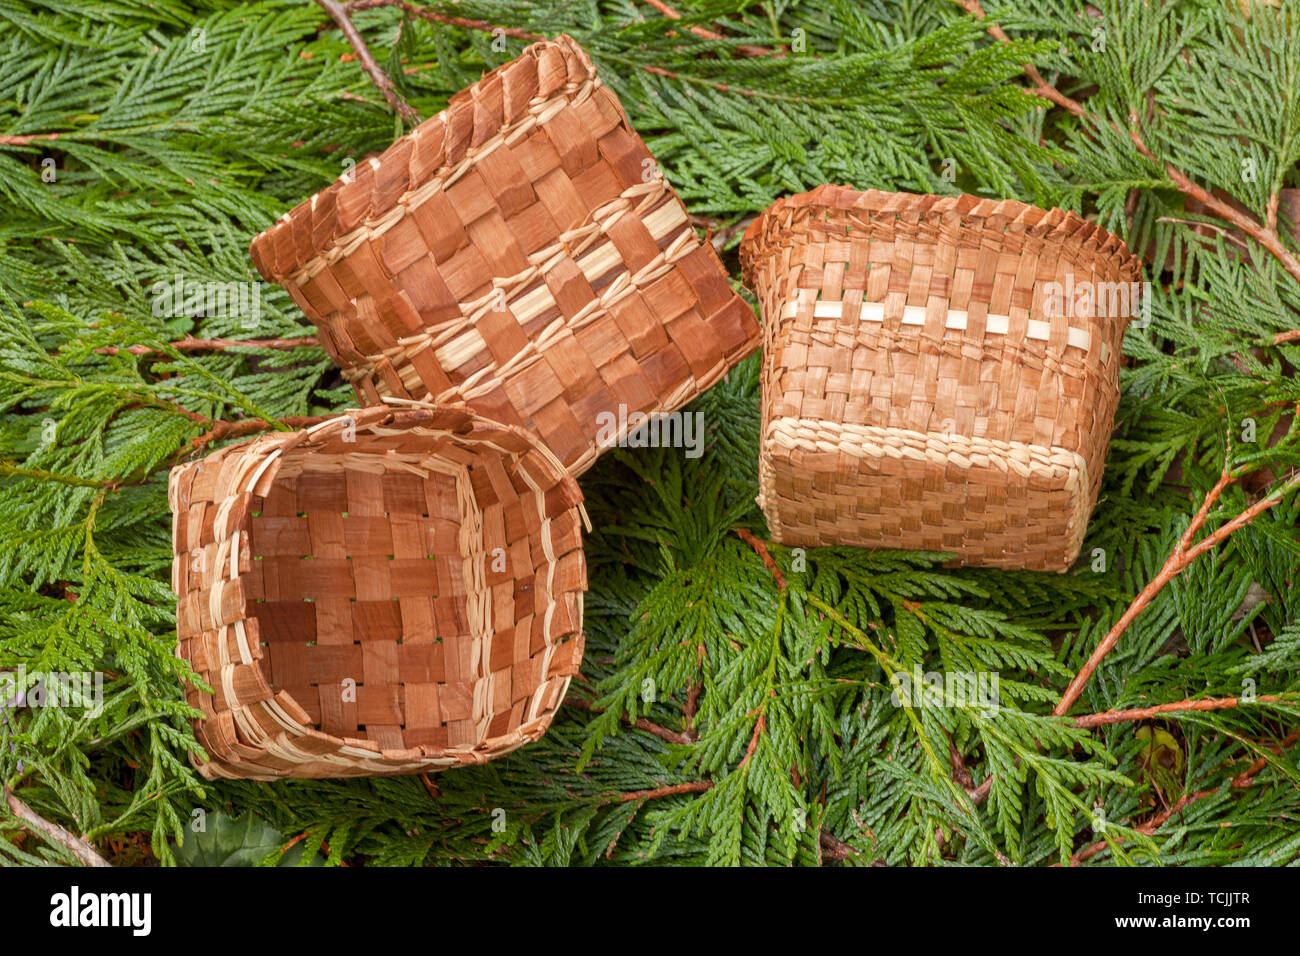 Three handmade Western Red Cedar baskets woven from strips of inner bark, lying on Western Red Cedar branches Stock Photo